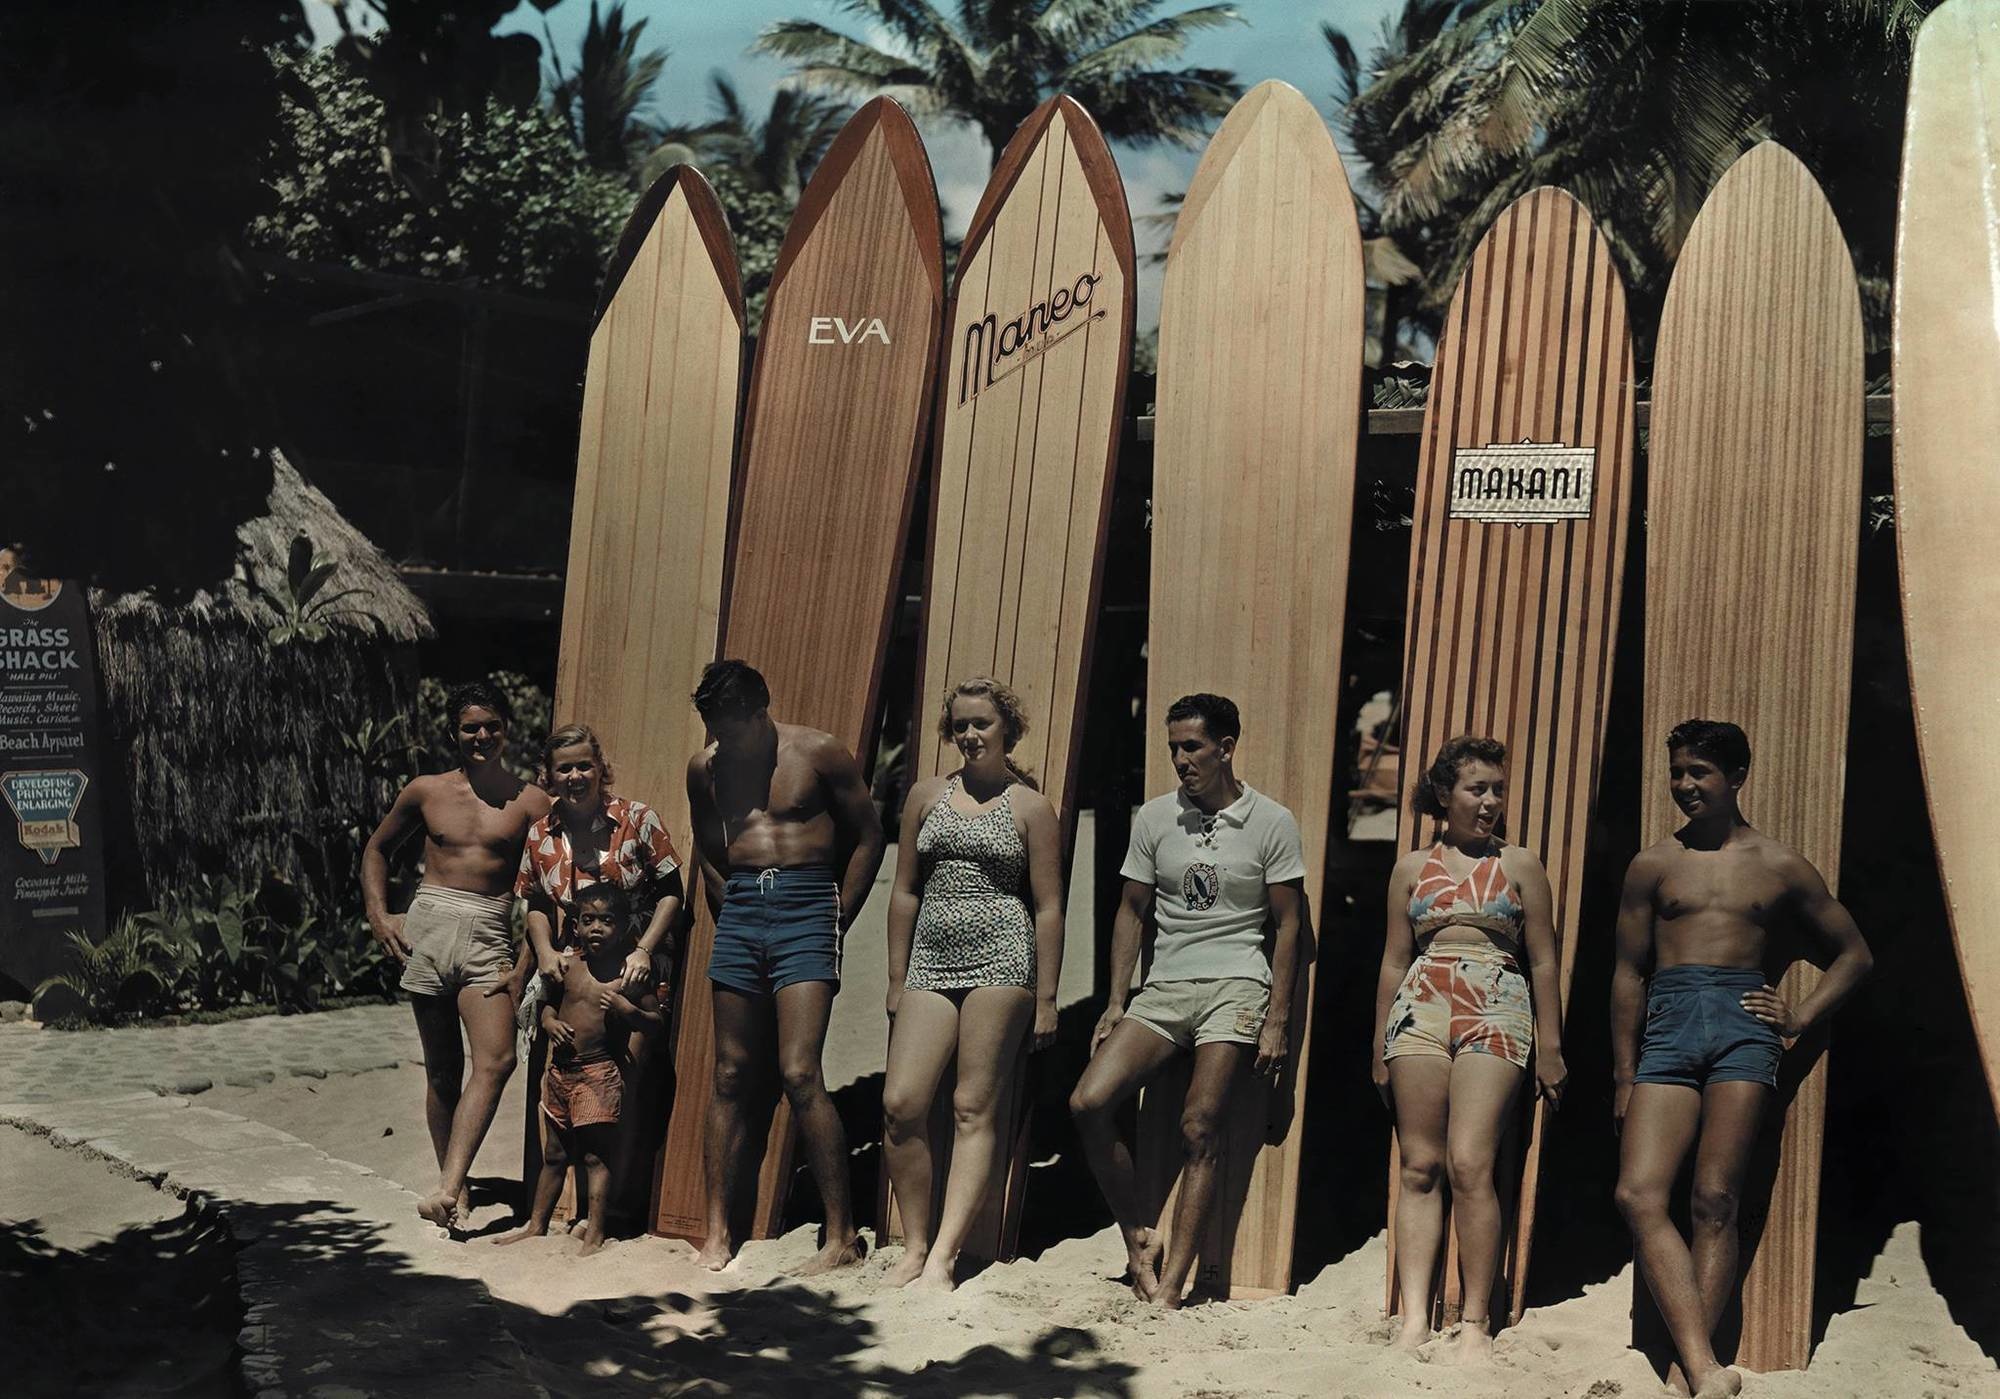 1937 surfers pose in front of their awesome wooden surf boards in Honolulu, Hawaii. This was before the advent of fiberglass boards, and these often weighed more than 100 pounds.